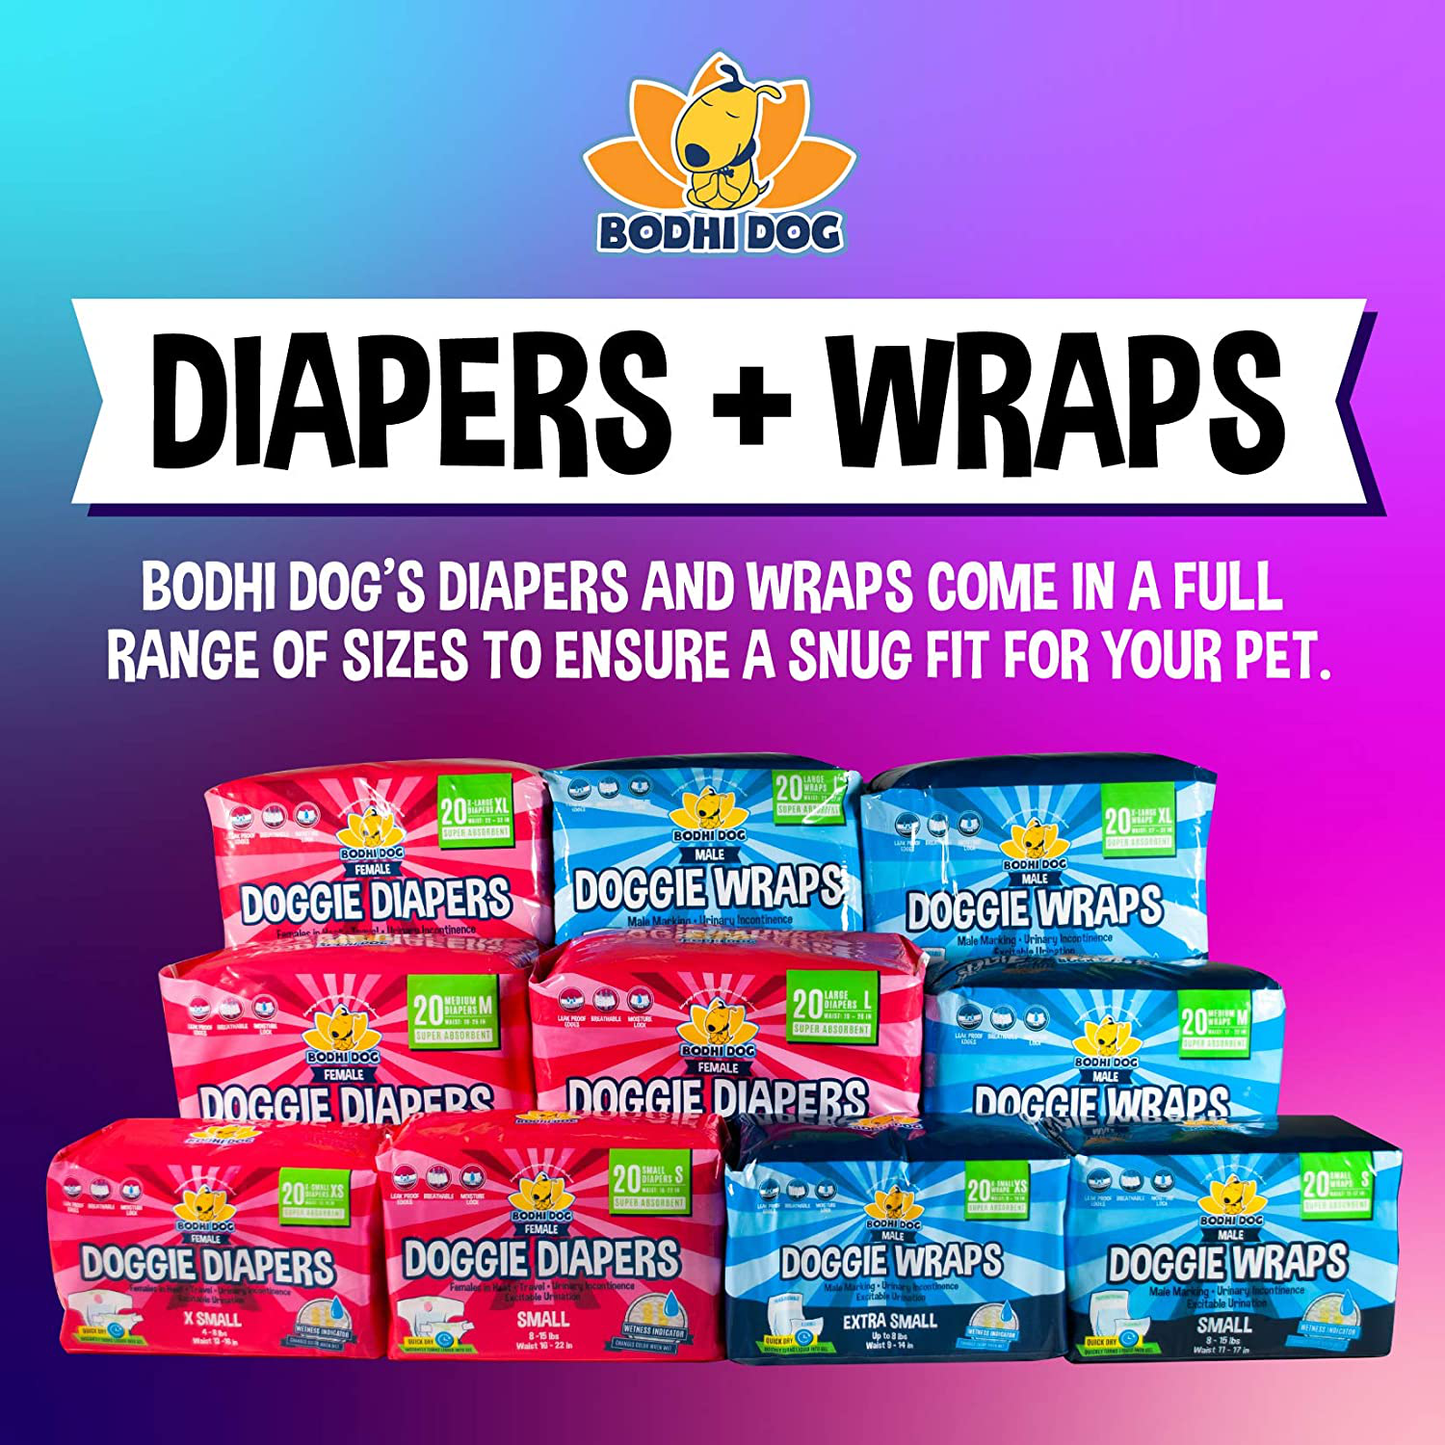 Bodhi Dog Disposable Male Dog Wraps | 20 Premium Quality Adjustable Doggie Wraps with Moisture Control and Wetness Indicator | 20 Count